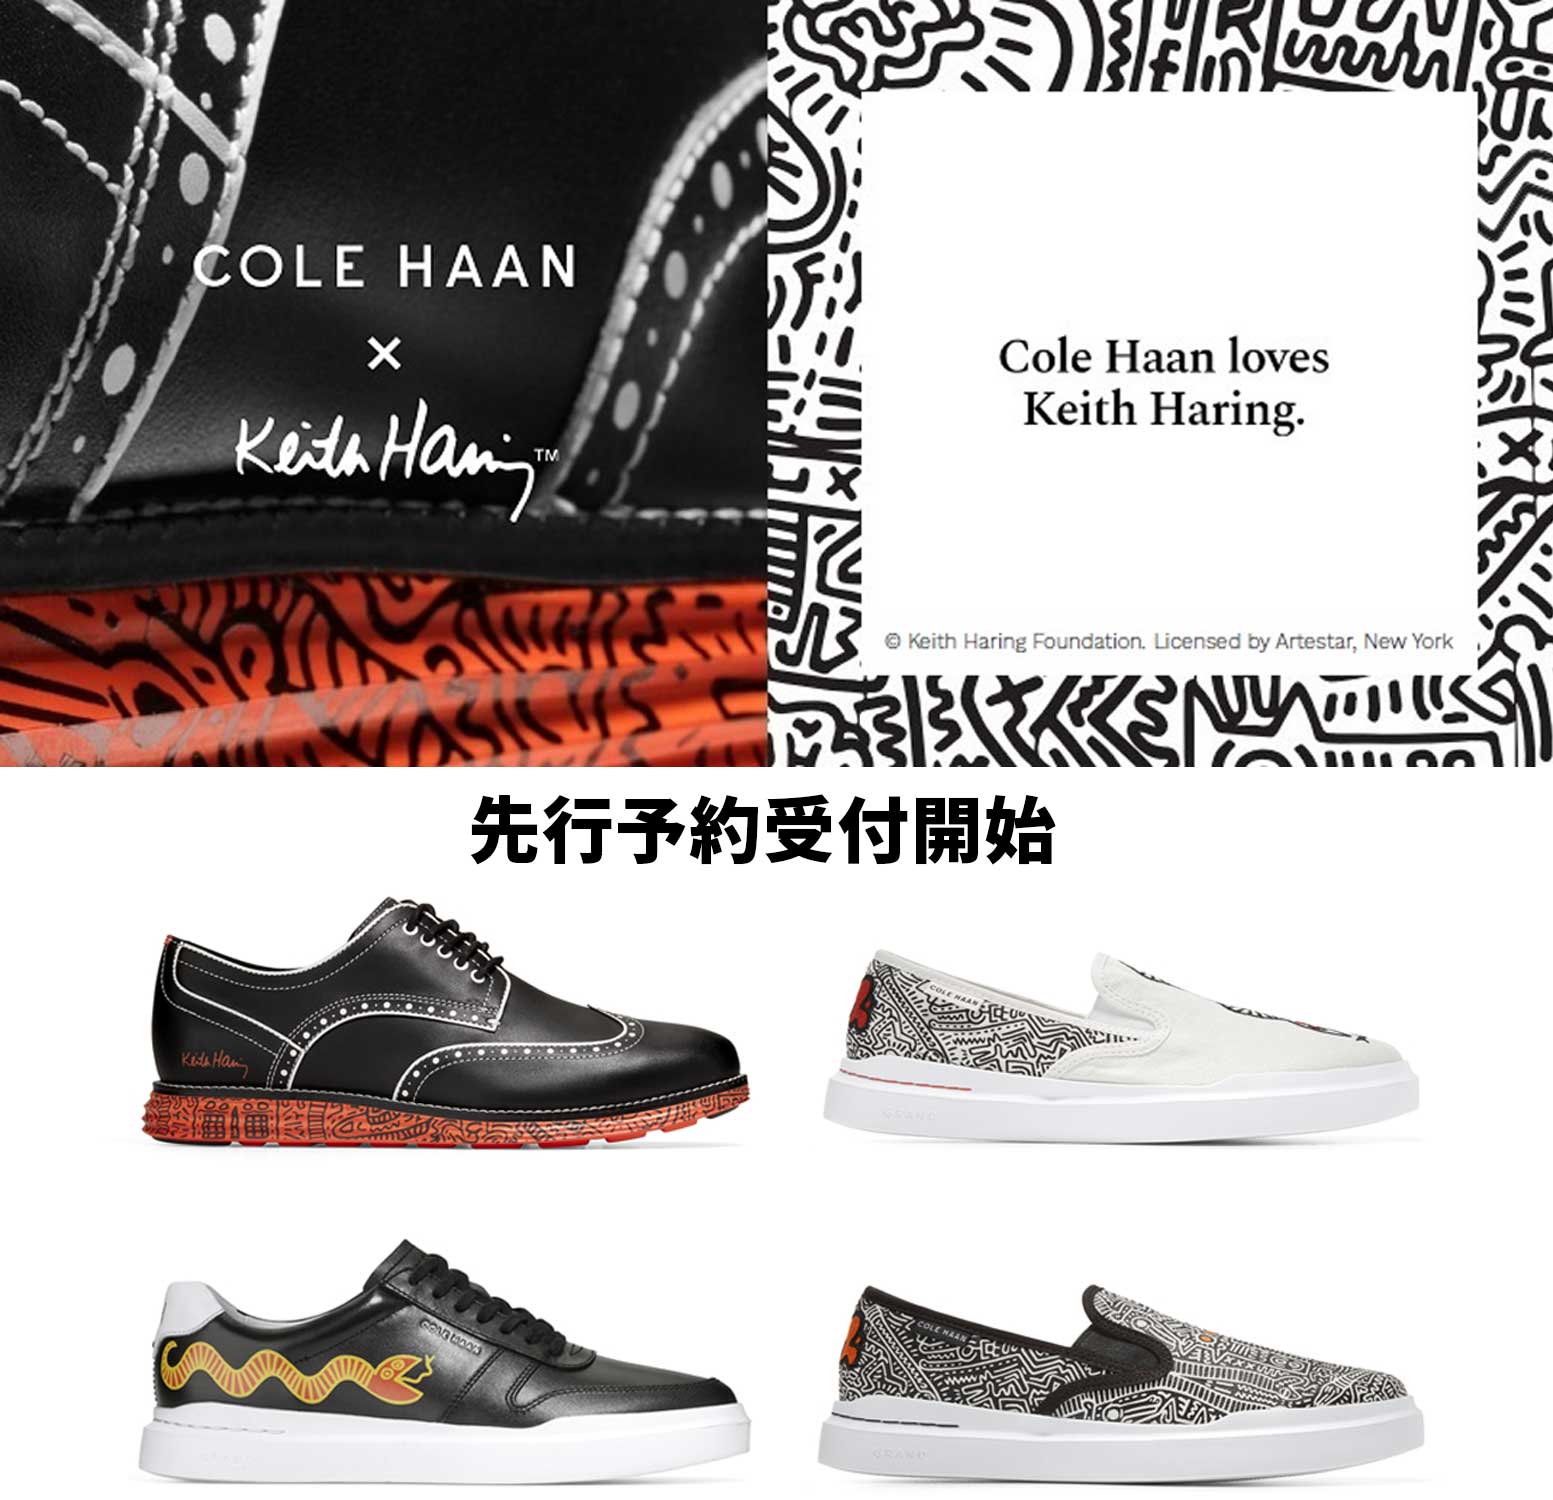 COLE HAAN x KEITH HARING